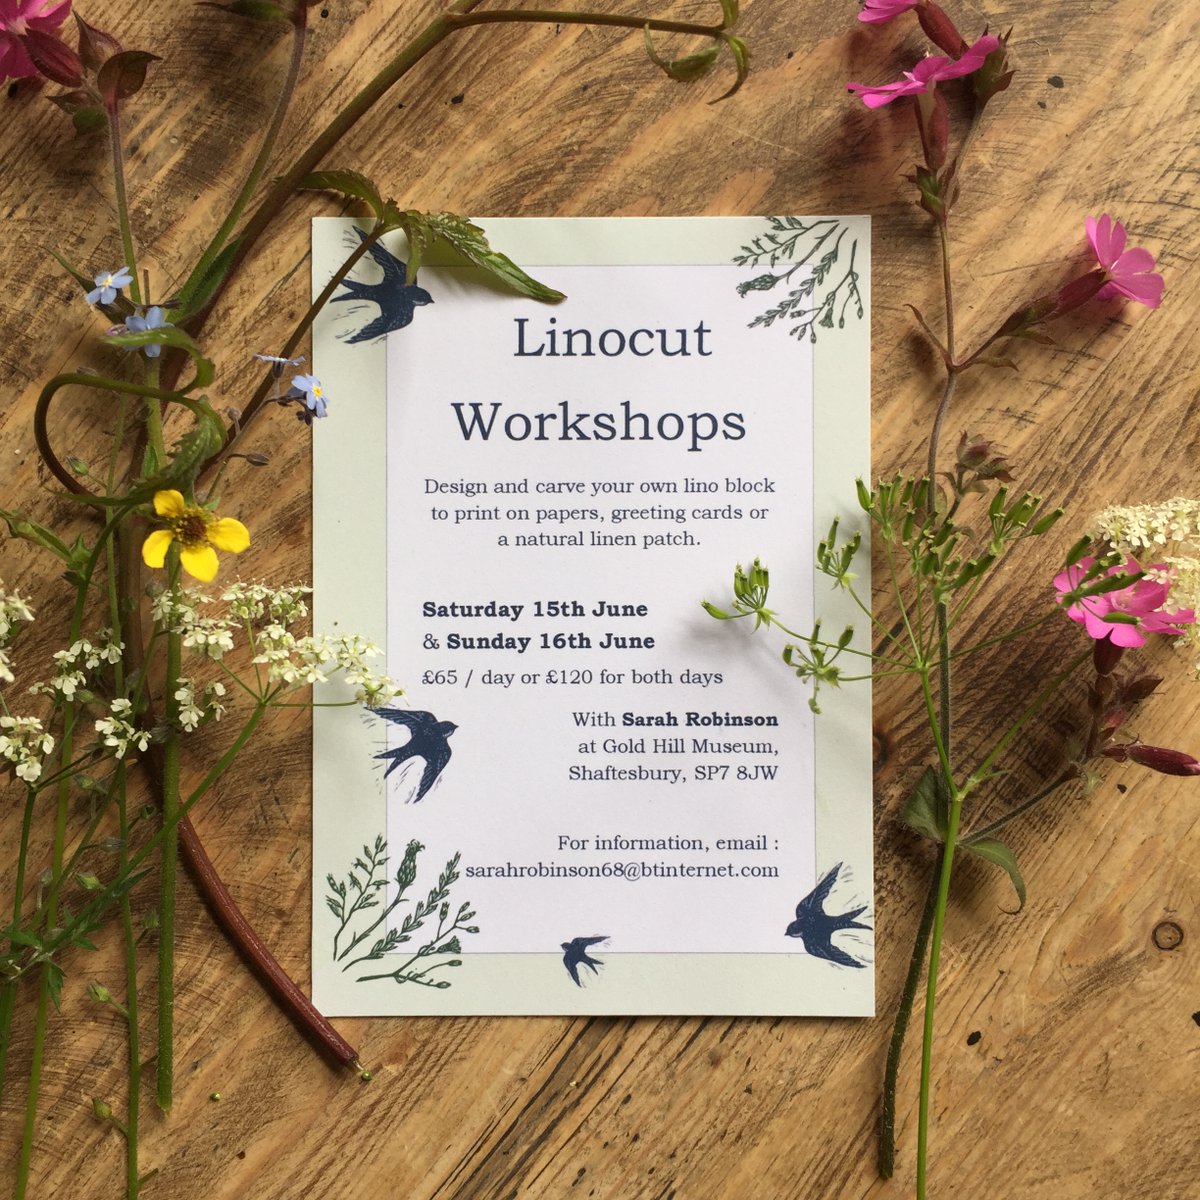 I sell greeting cards, linocuts etc but I also really enjoy running workshops. My next ones are in June, so if you fancy learning a new skill and can make it to North Dorset, just drop me a line - I'd love to see you there 💚

#UKGiftHour #UKGiftAM #shopindie #giftideas #indiebiz